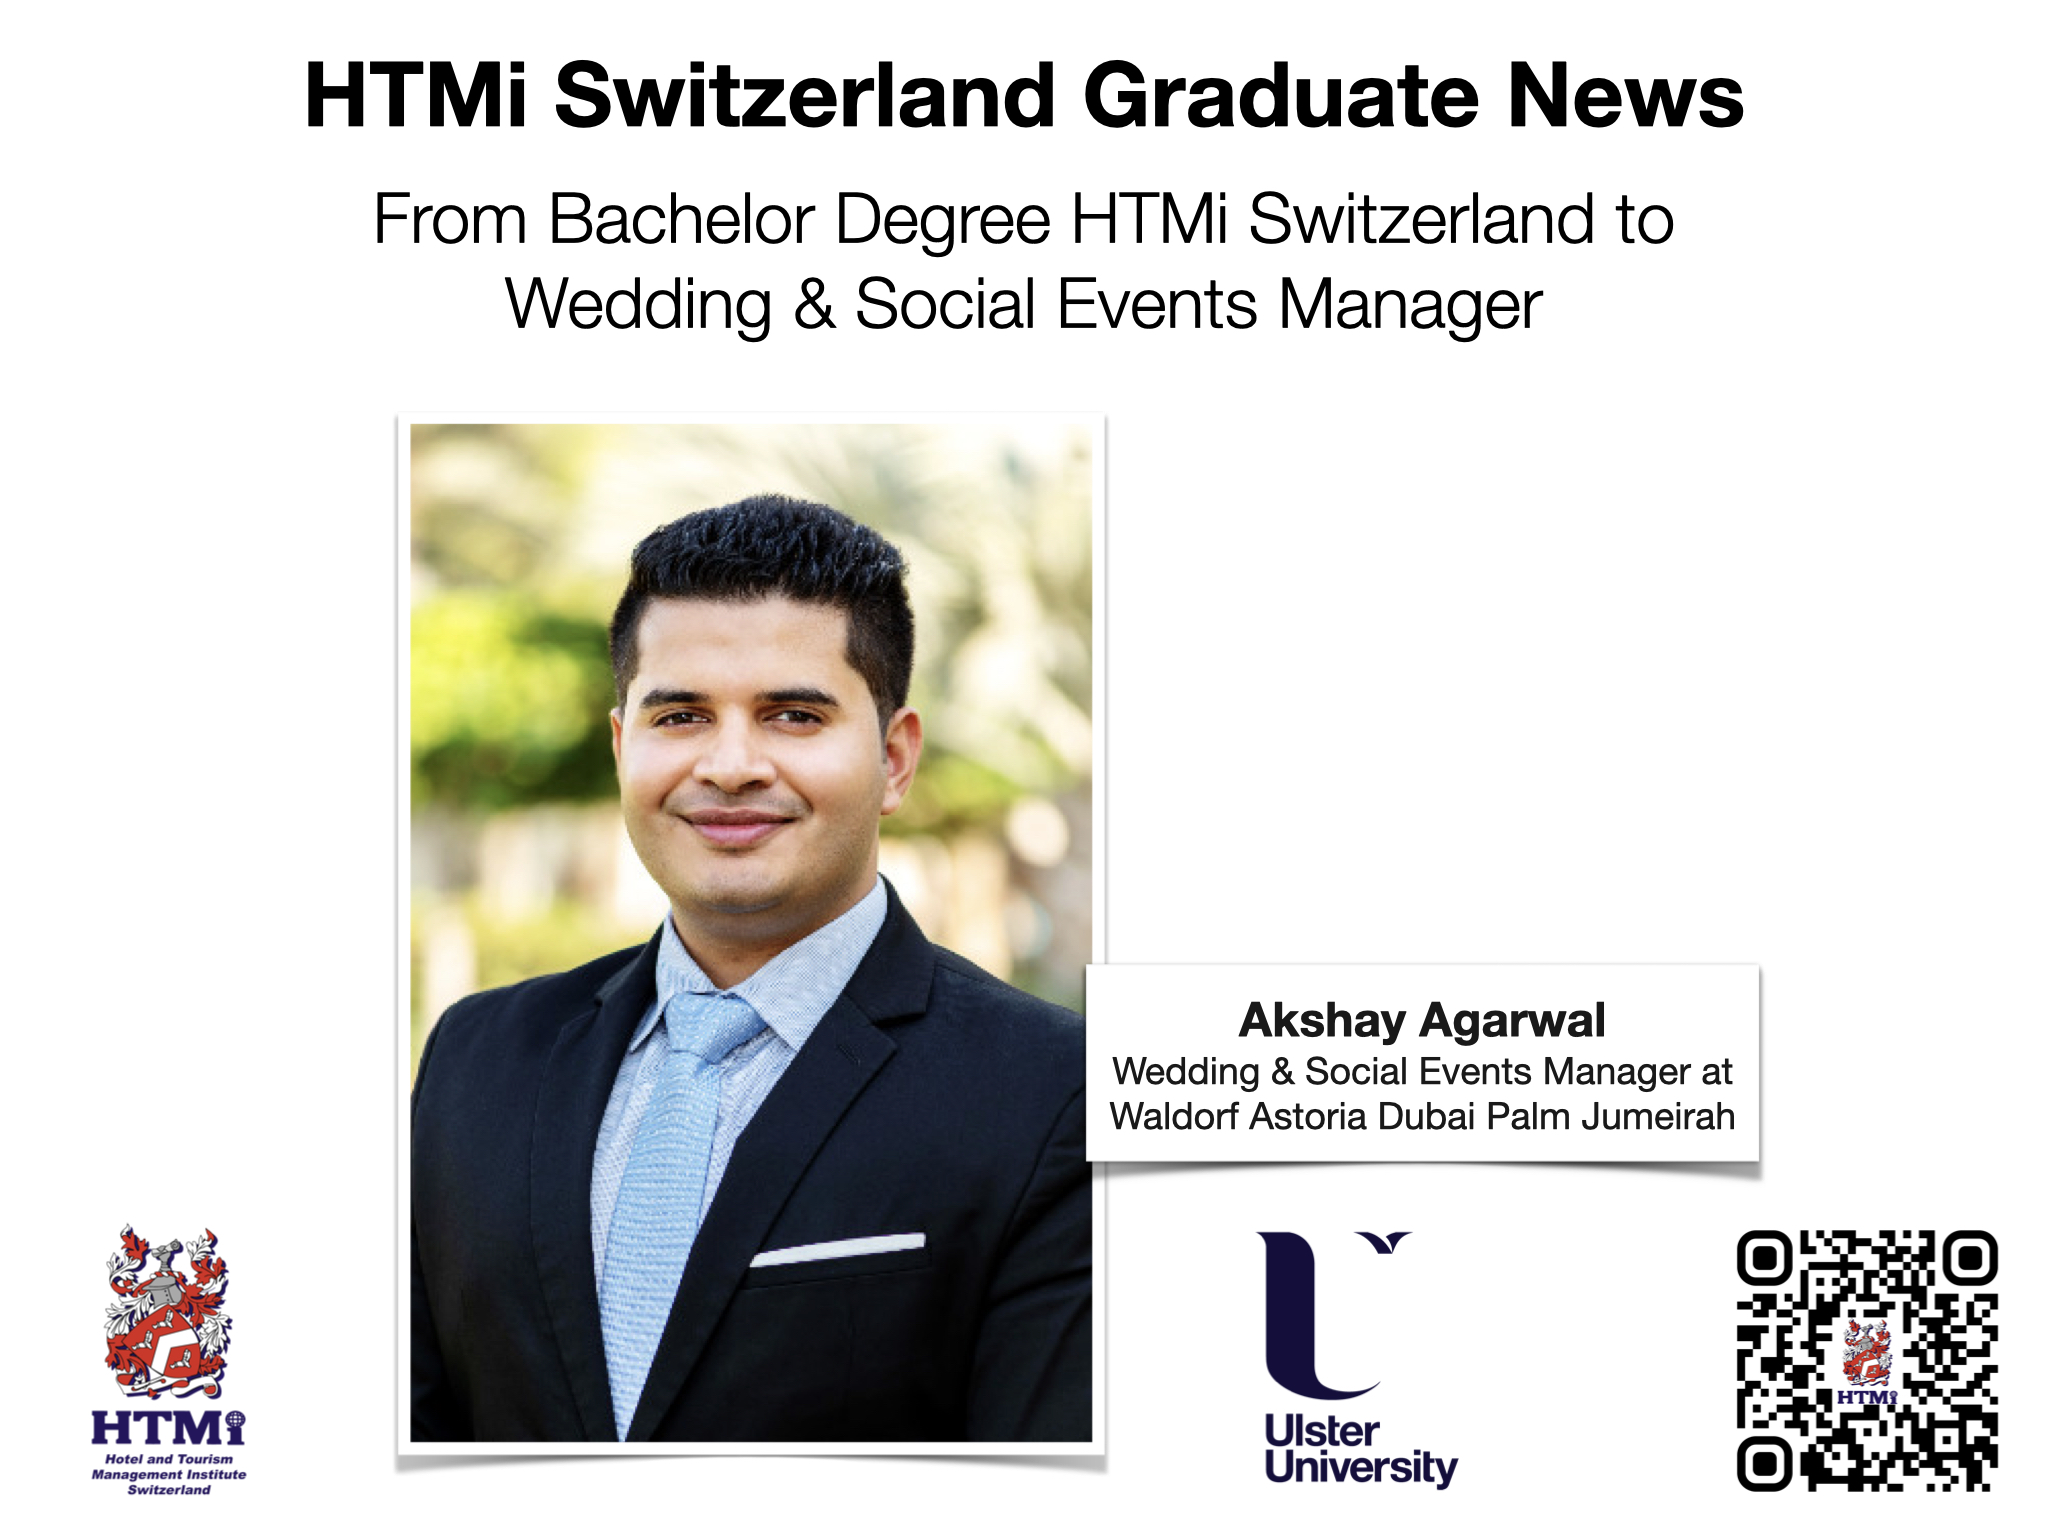 Akshay Agarwal - From Bachelor Degree HTMi Switzerland to Wedding & Social Events Manager